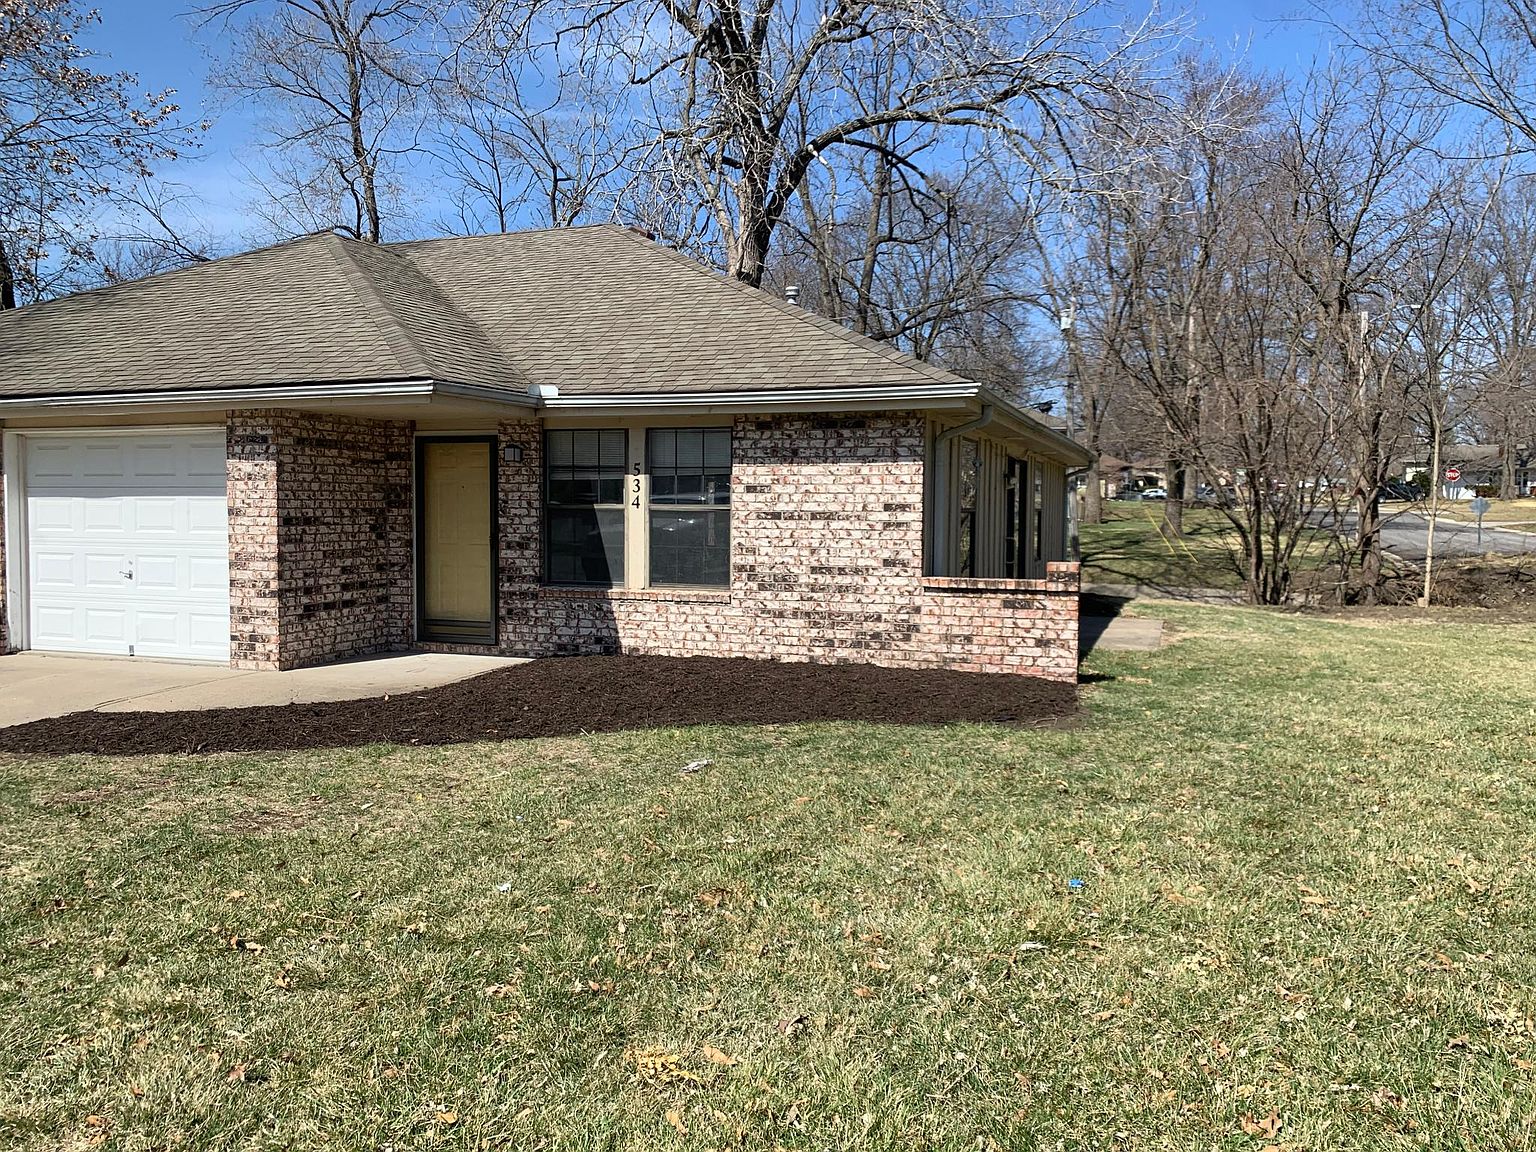 500 SE Lee Haven Dr, Lees Summit, MO 64063 | Zillow